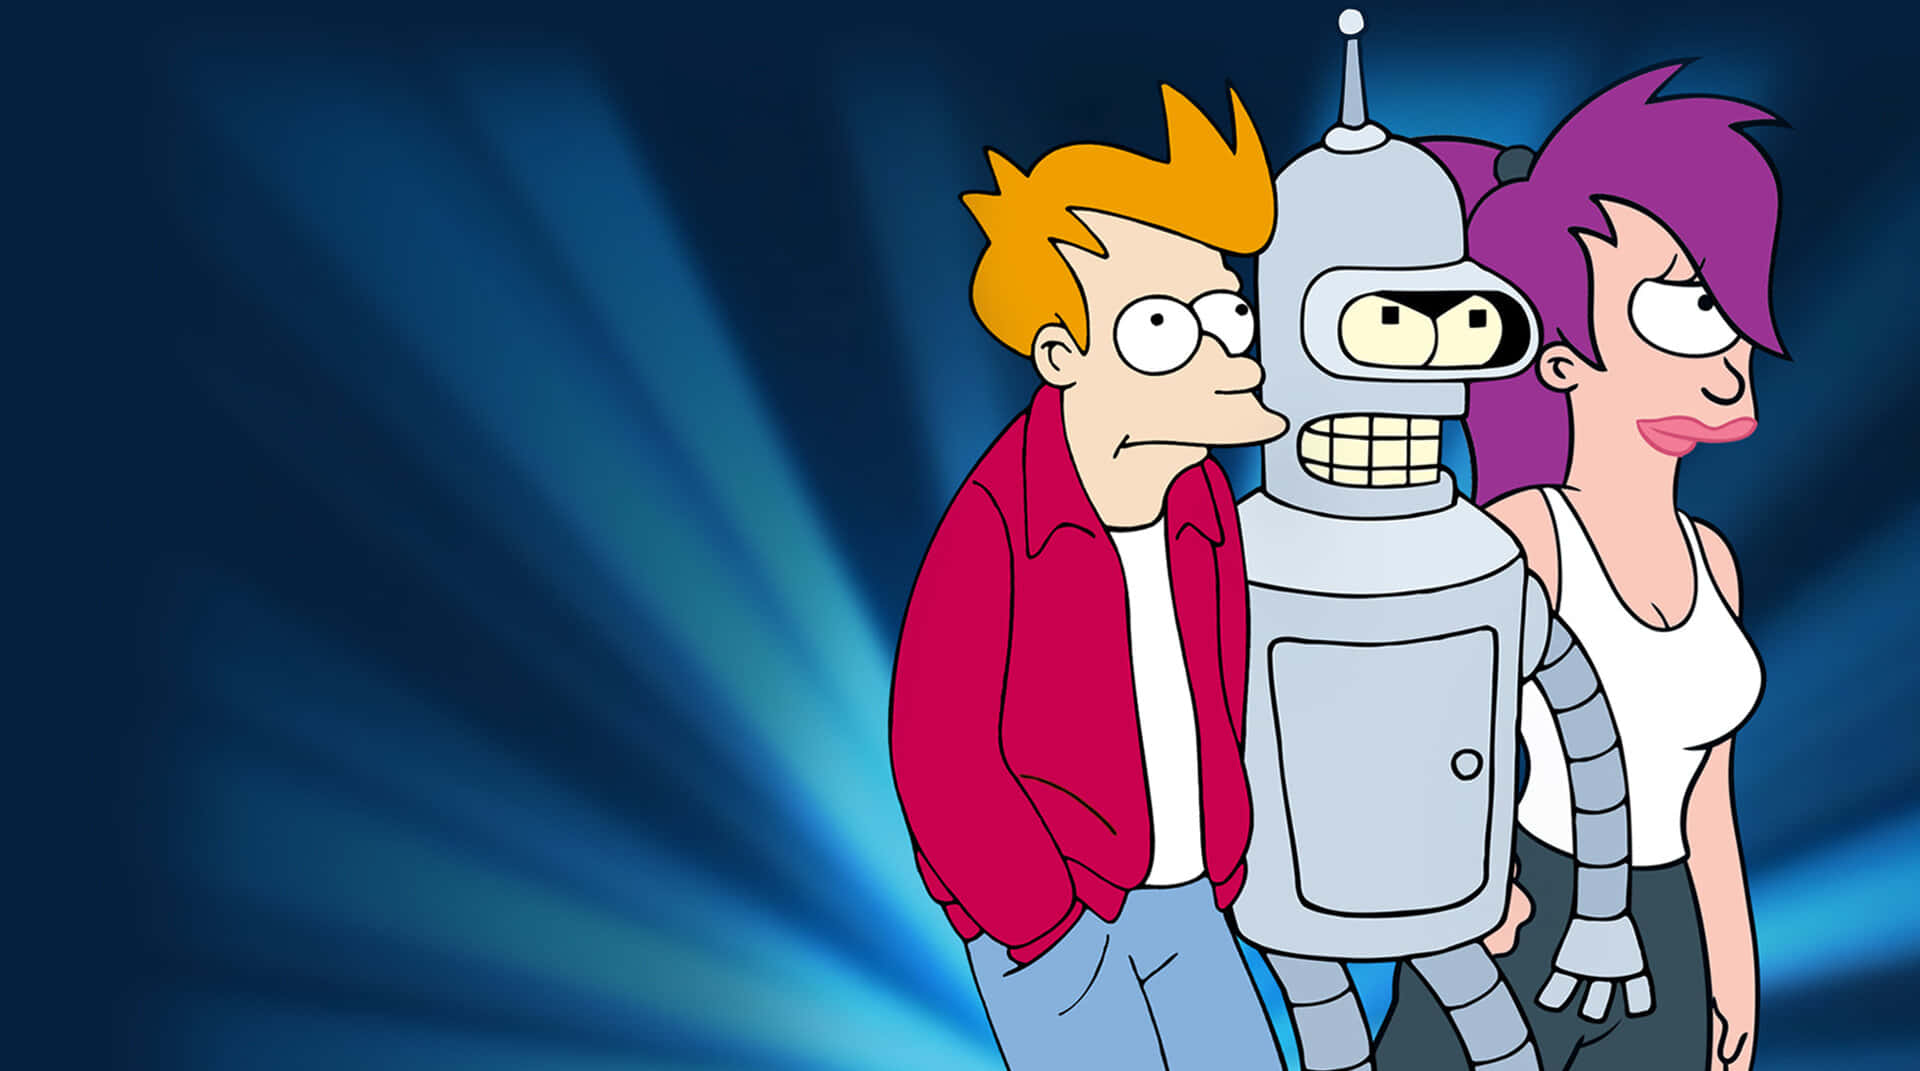 "Time for a little Bender Action!"